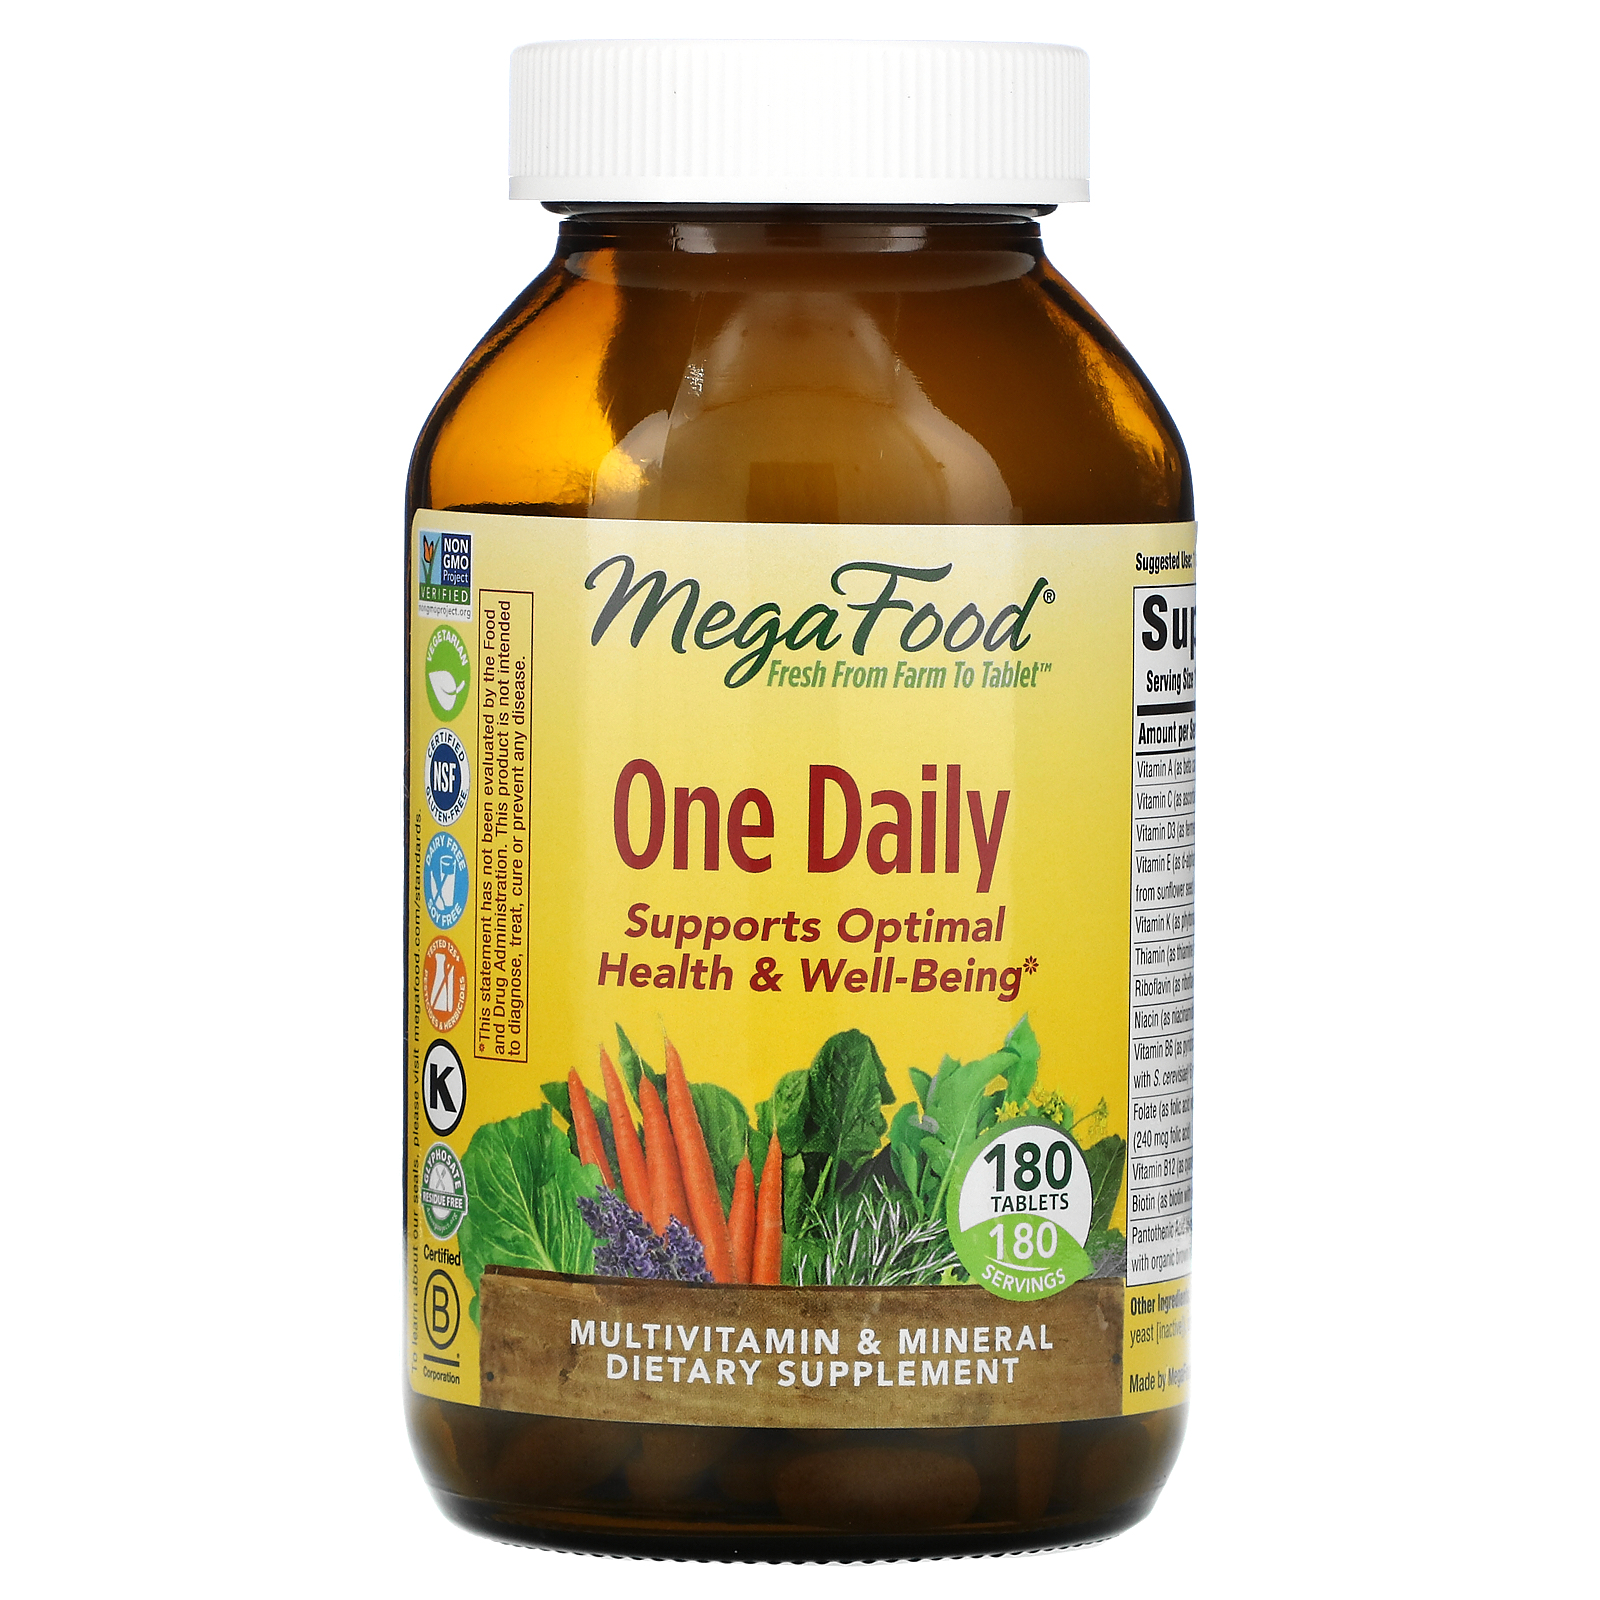 iherb promo code 2018 Not Resulting In Financial Prosperity